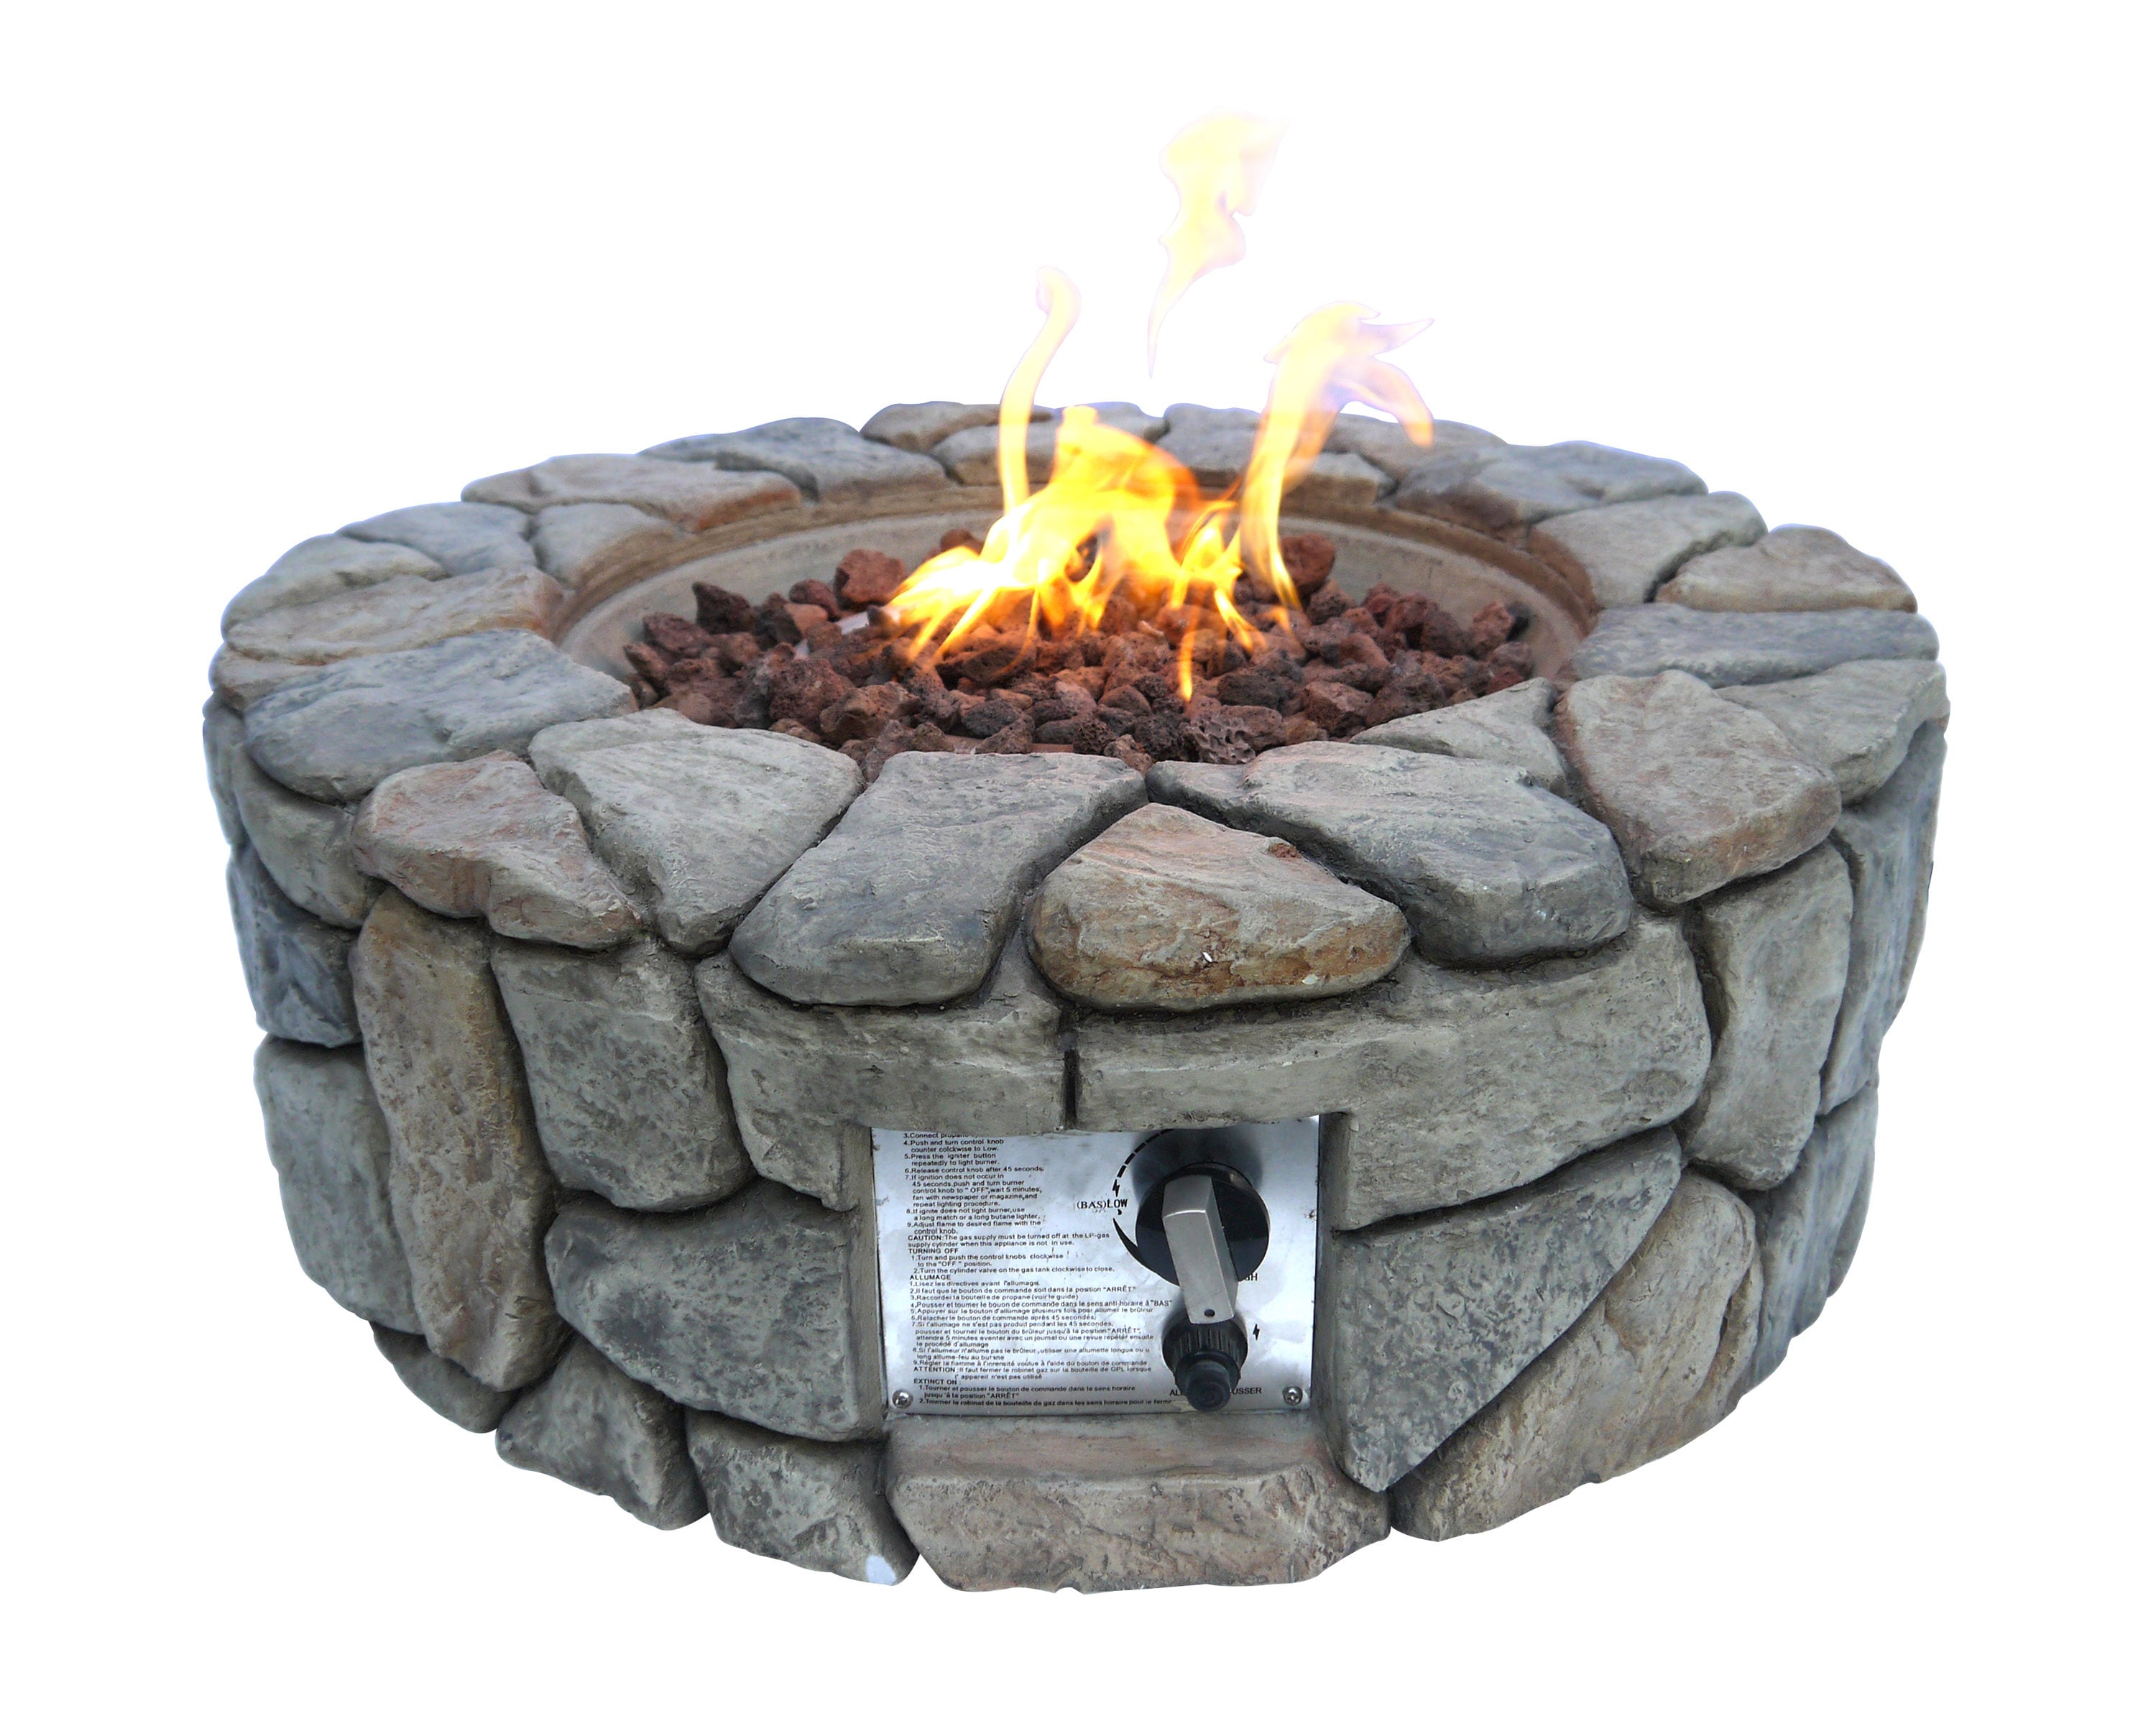 Concrete Propane Gas Fire Pit, Bed Bath And Beyond Fire Pit